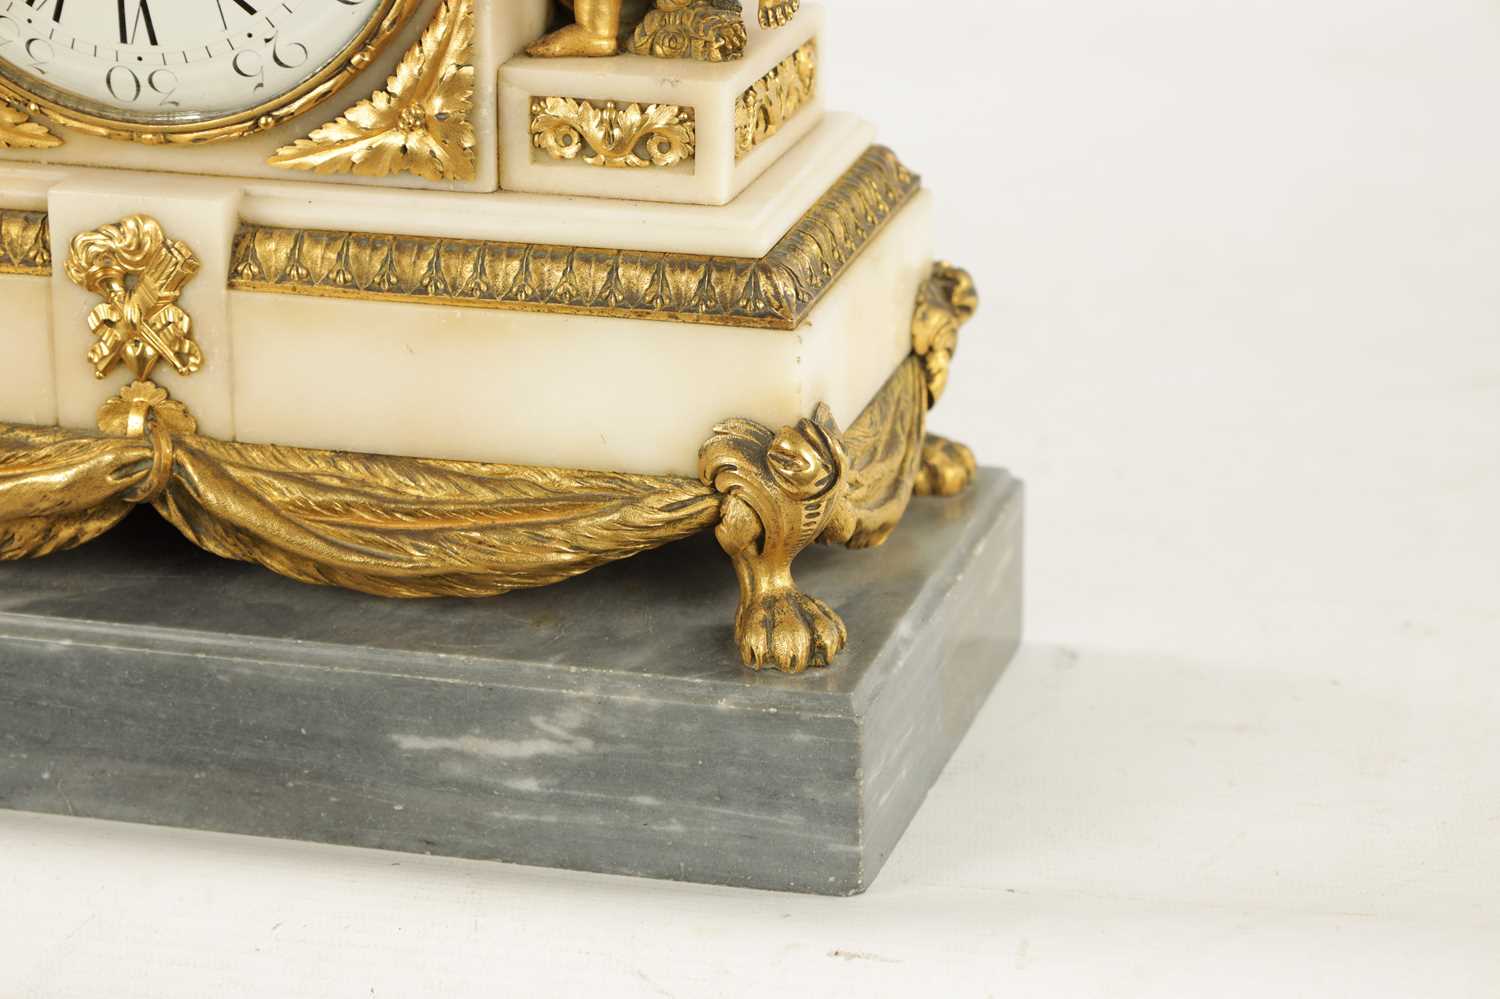 CHARLES LEROY, A PARIS. A FRENCH LOUIS XVI ORMOLU AND MARBLE FIGURAL MANTEL CLOCK - Image 6 of 11